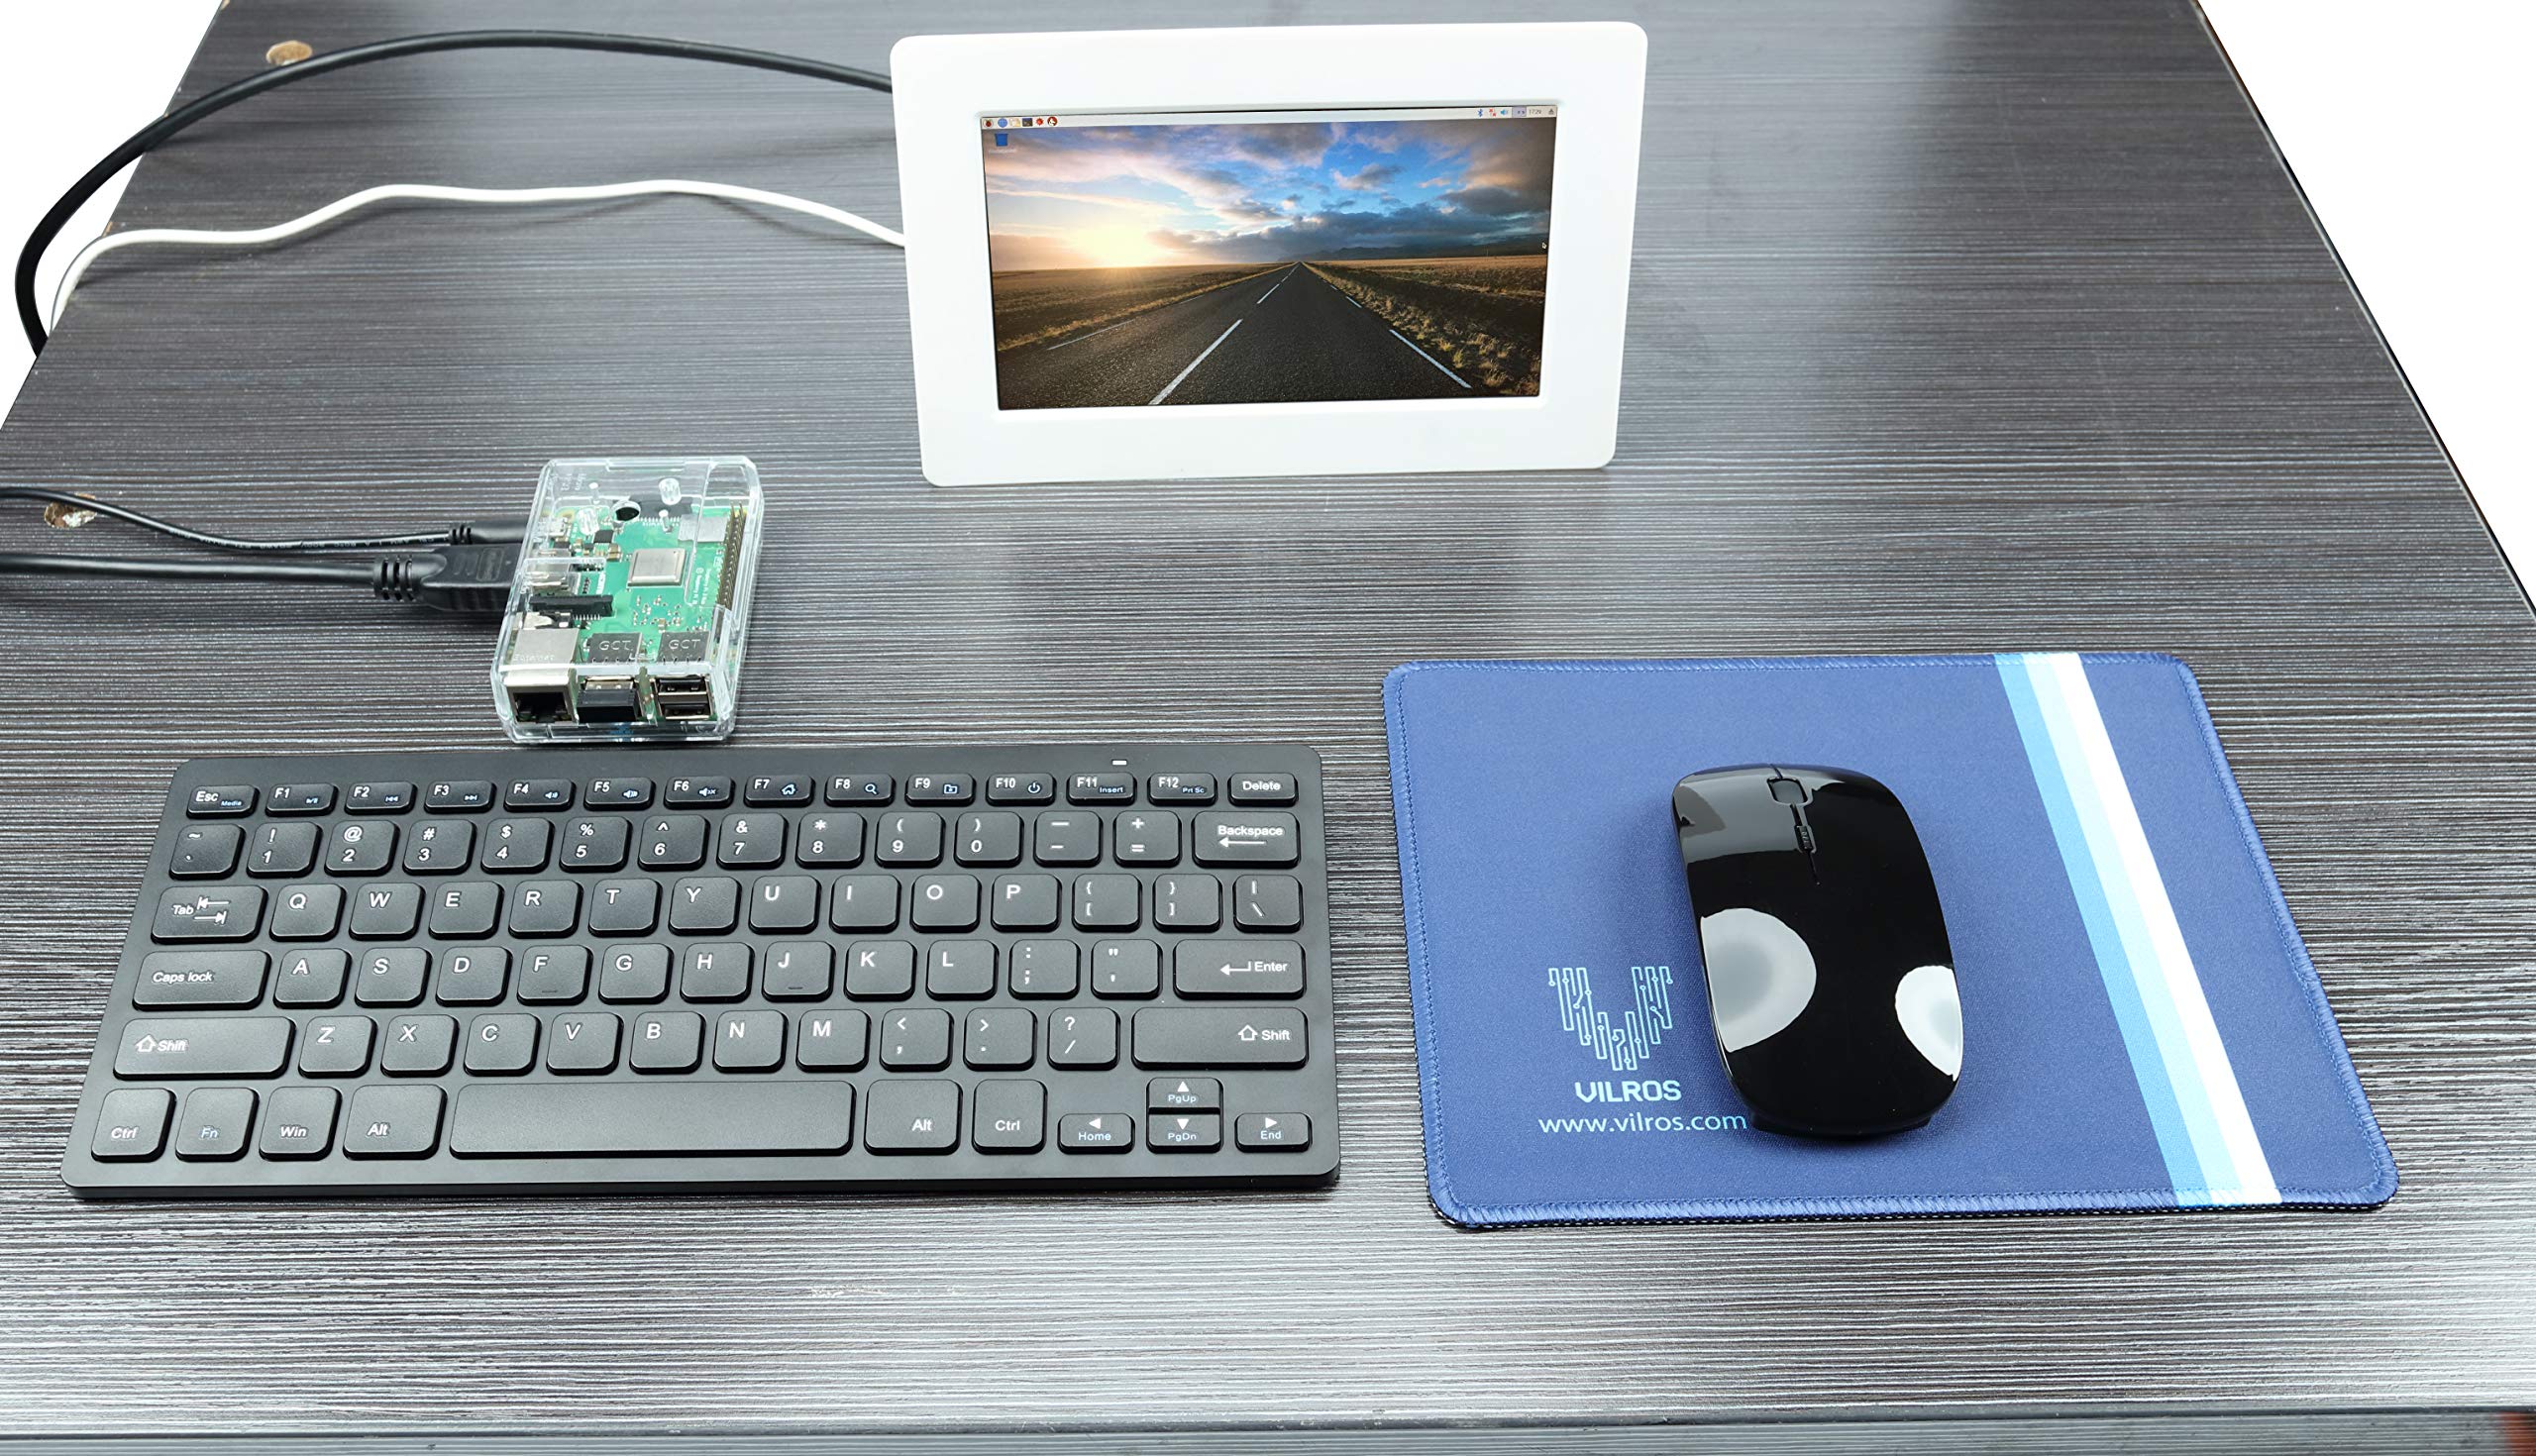 Vilros 2.4GHz Wireless Keyboard and Mouse with Mouse-Pad-Great for Raspberry Pi